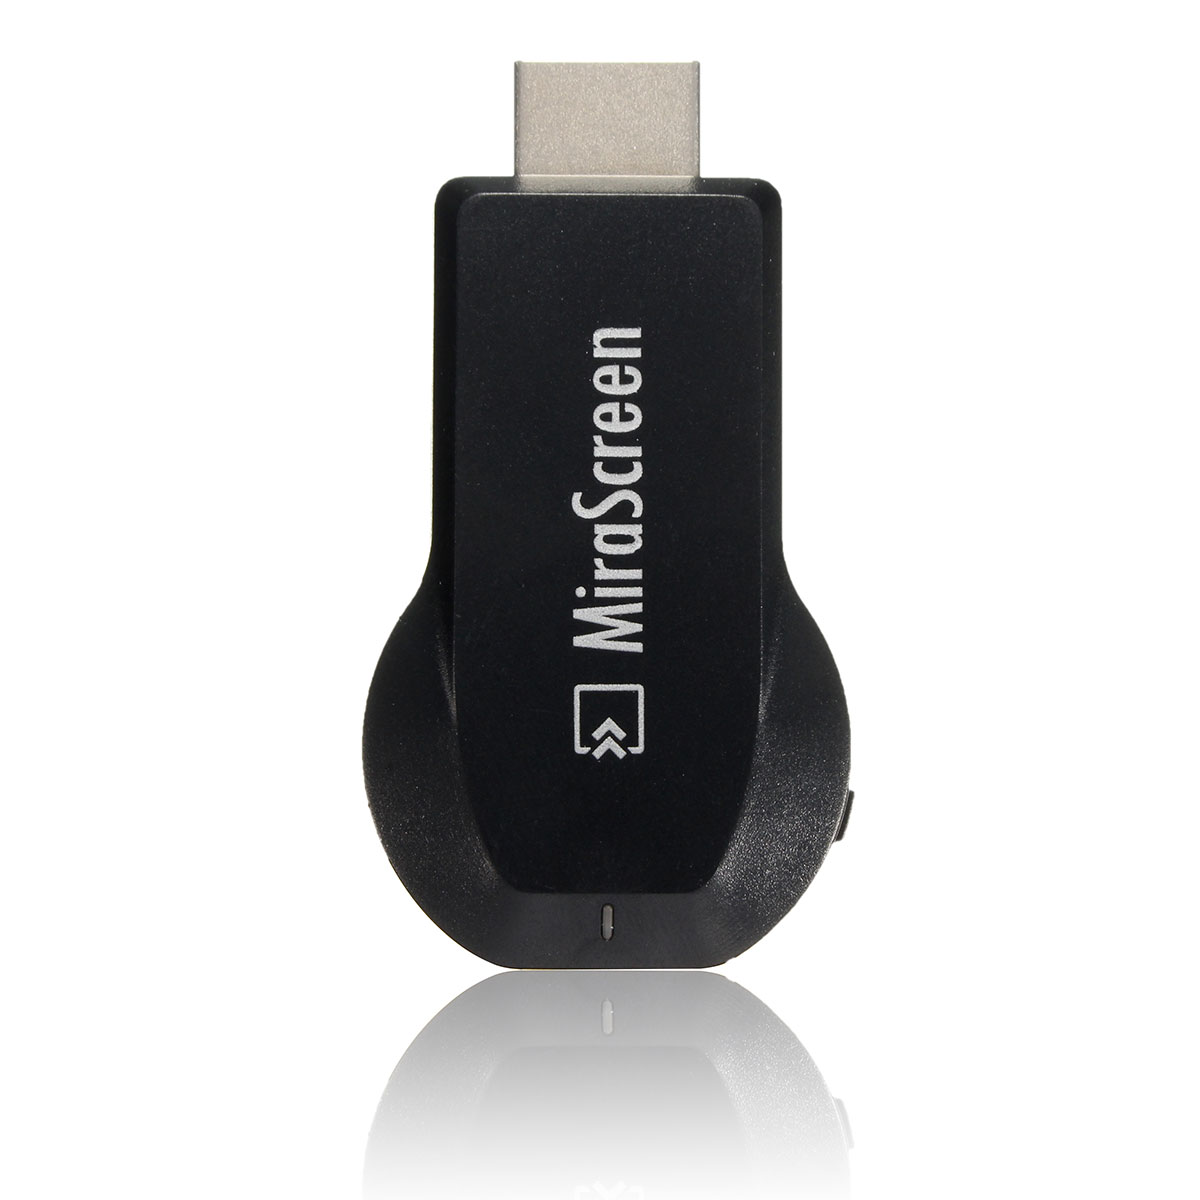 24G-Miracast-Wifi-Display-HD-1080P-HD-AirPlay-DLNA-TV-Dongle-Stick-Receiver-1054250